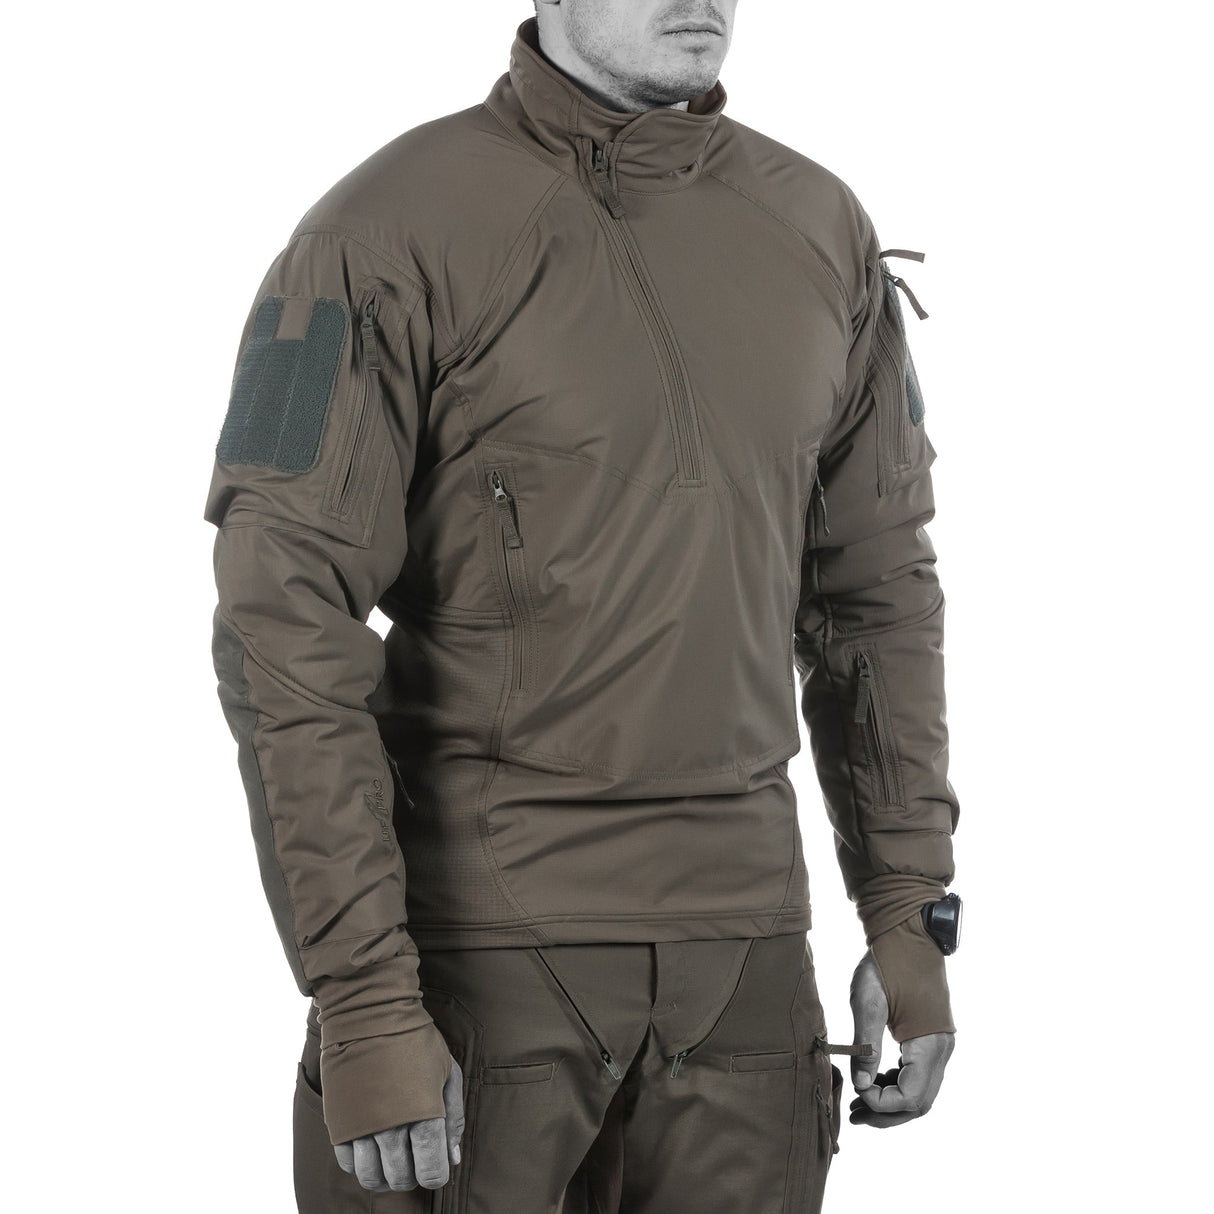 UF PRO Ace Winter Combat Shirt: Stay Warm in Extreme Cold Conditions ...